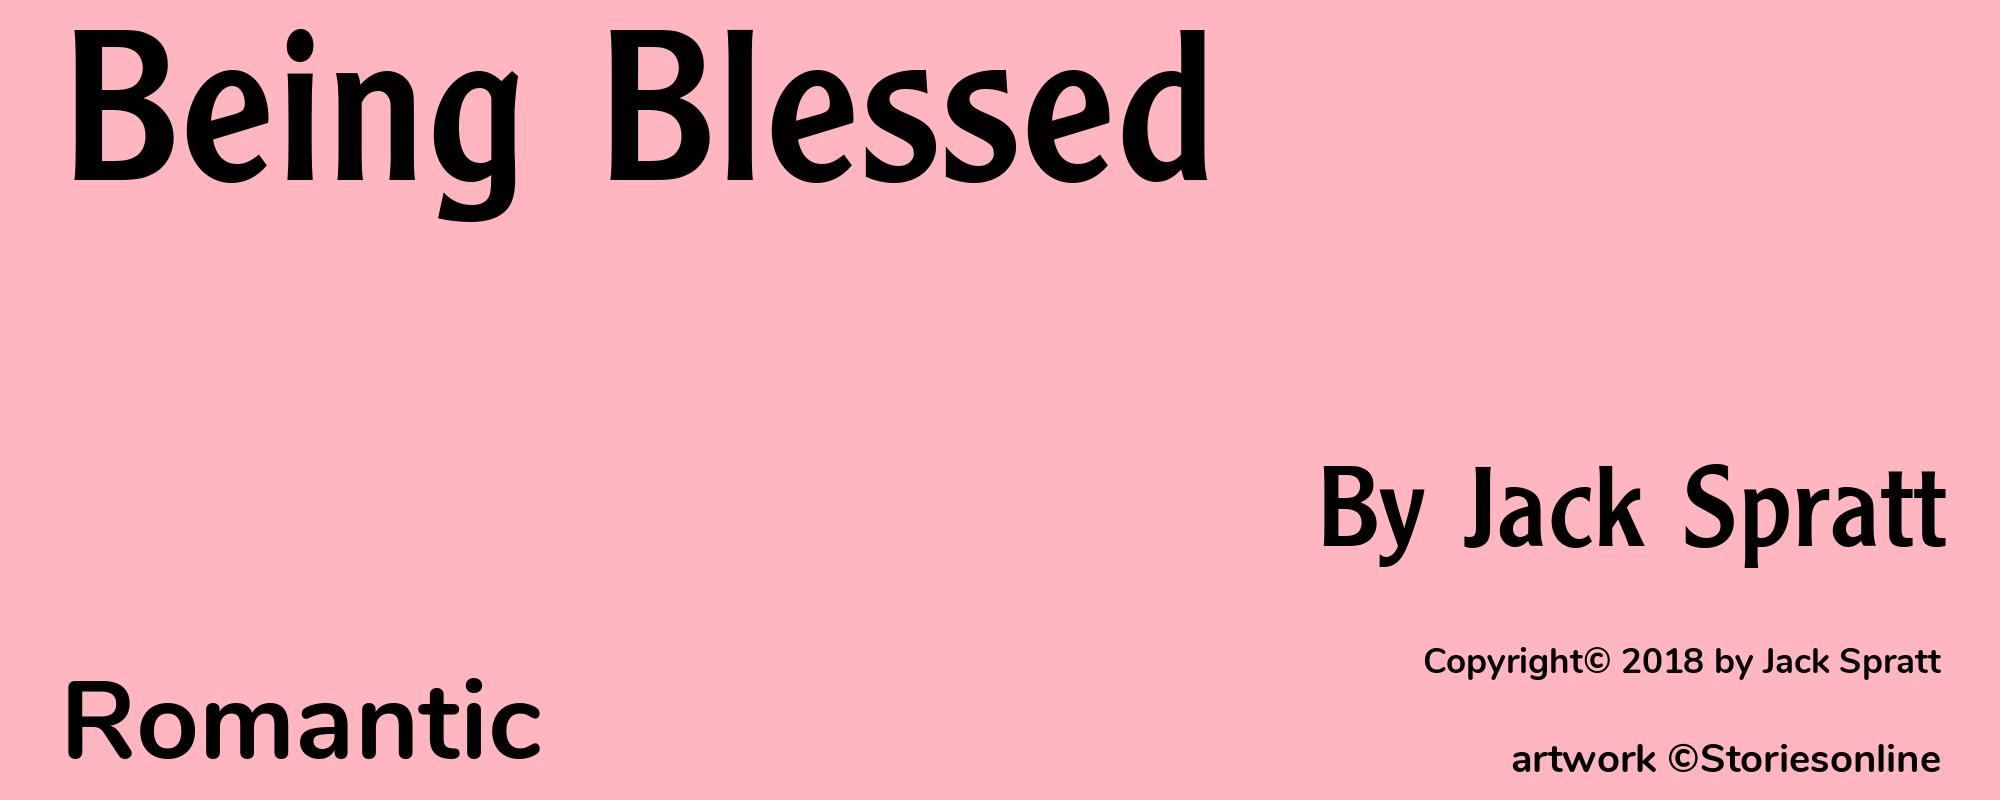 Being Blessed - Cover